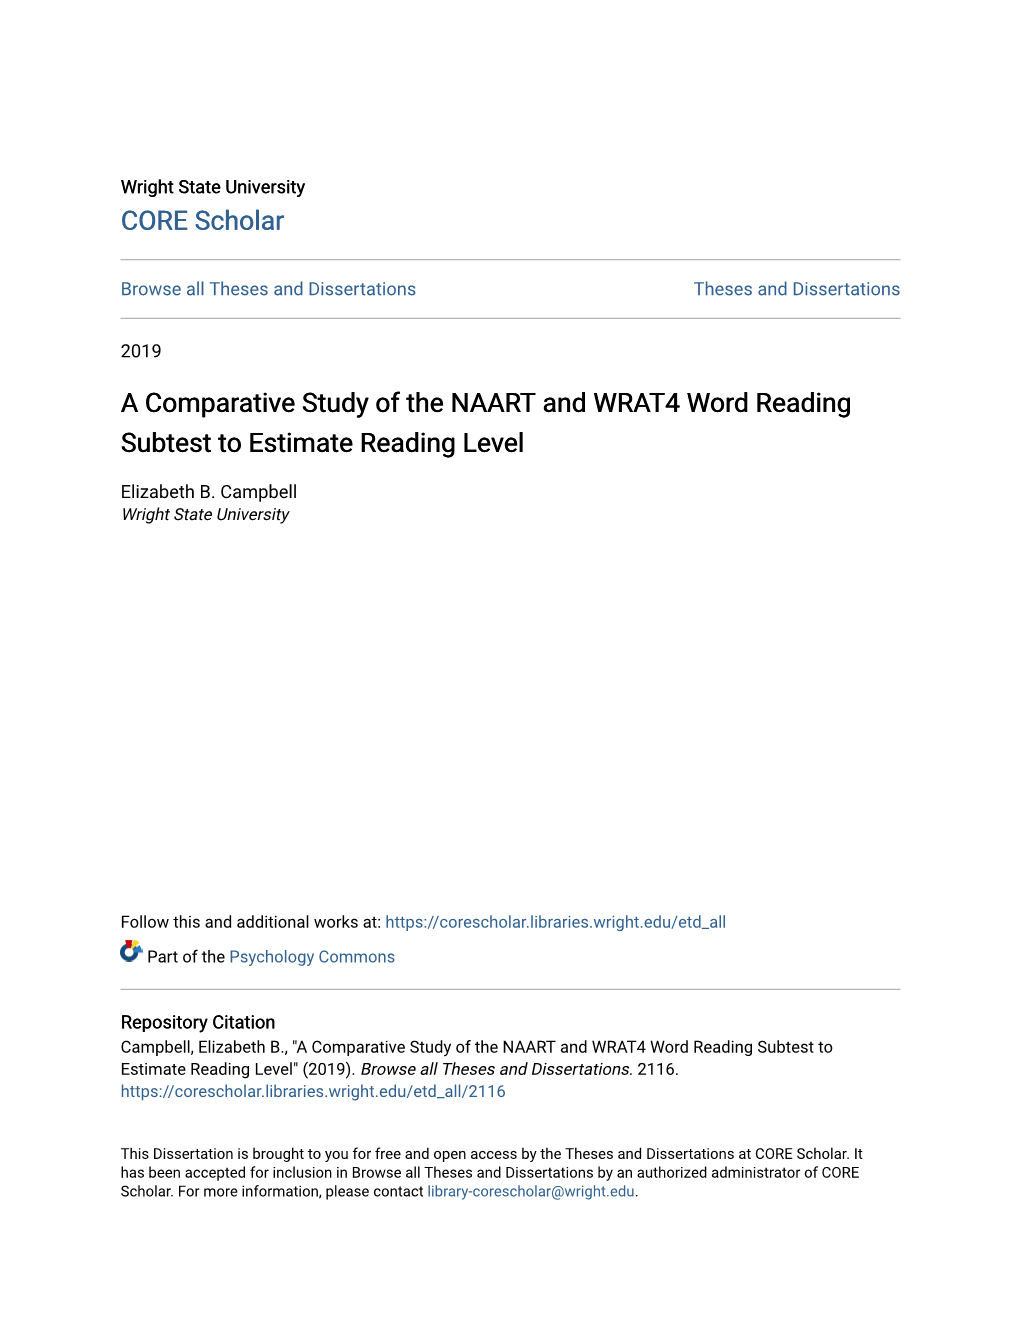 A Comparative Study of the NAART and WRAT4 Word Reading Subtest to Estimate Reading Level